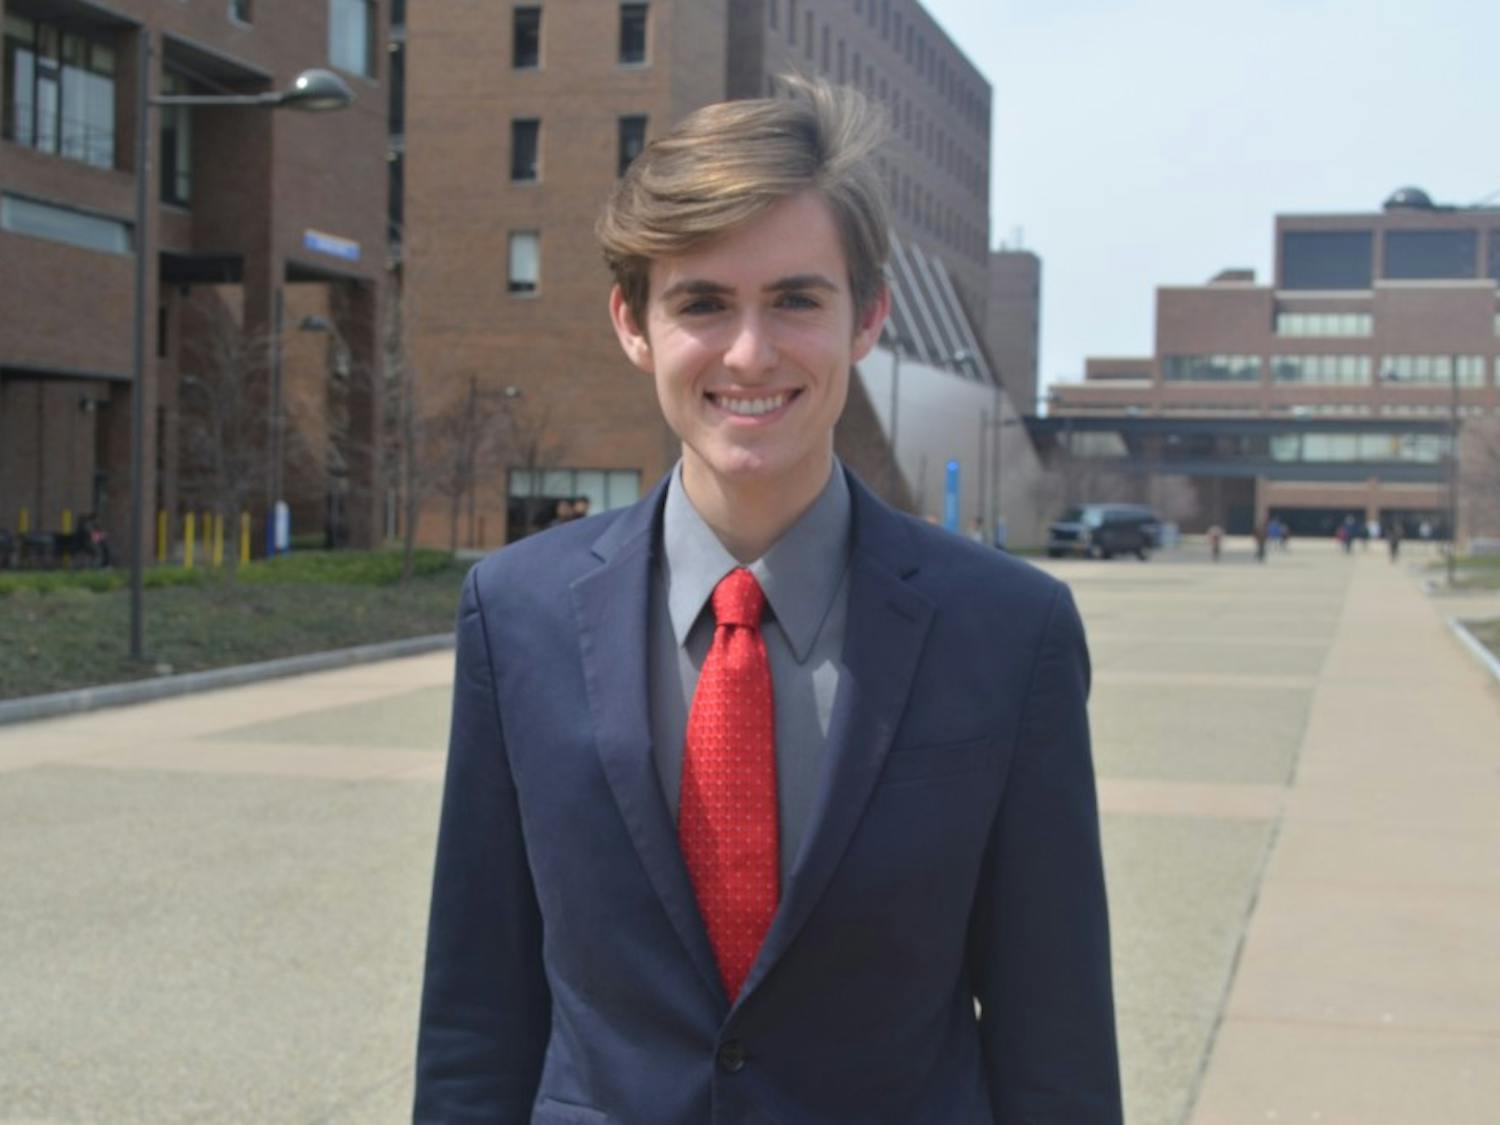 Jimmy Corra, a junior economics major and current Student Association Assembly speaker, has been elected UB Council student representative for the 2016-17 school year.